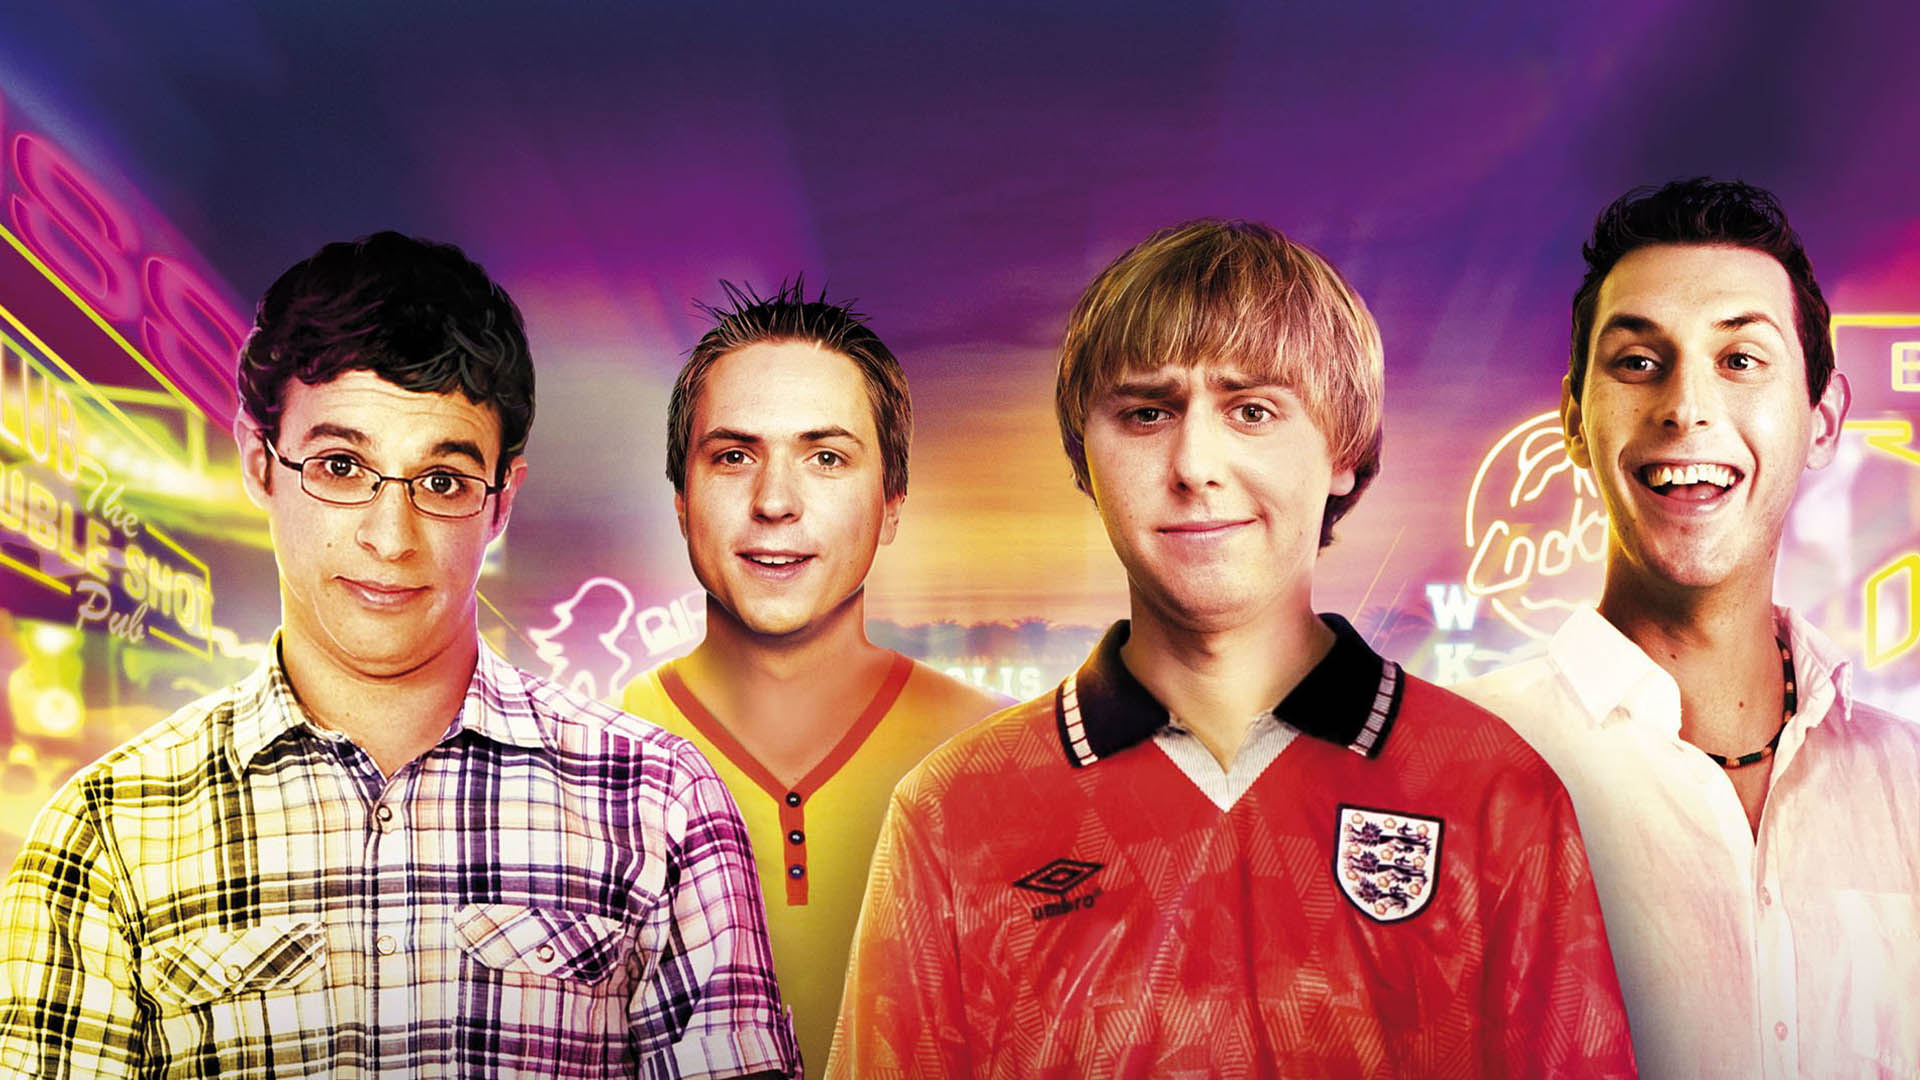 The Inbetweeners movie cover with the presence of its main characters